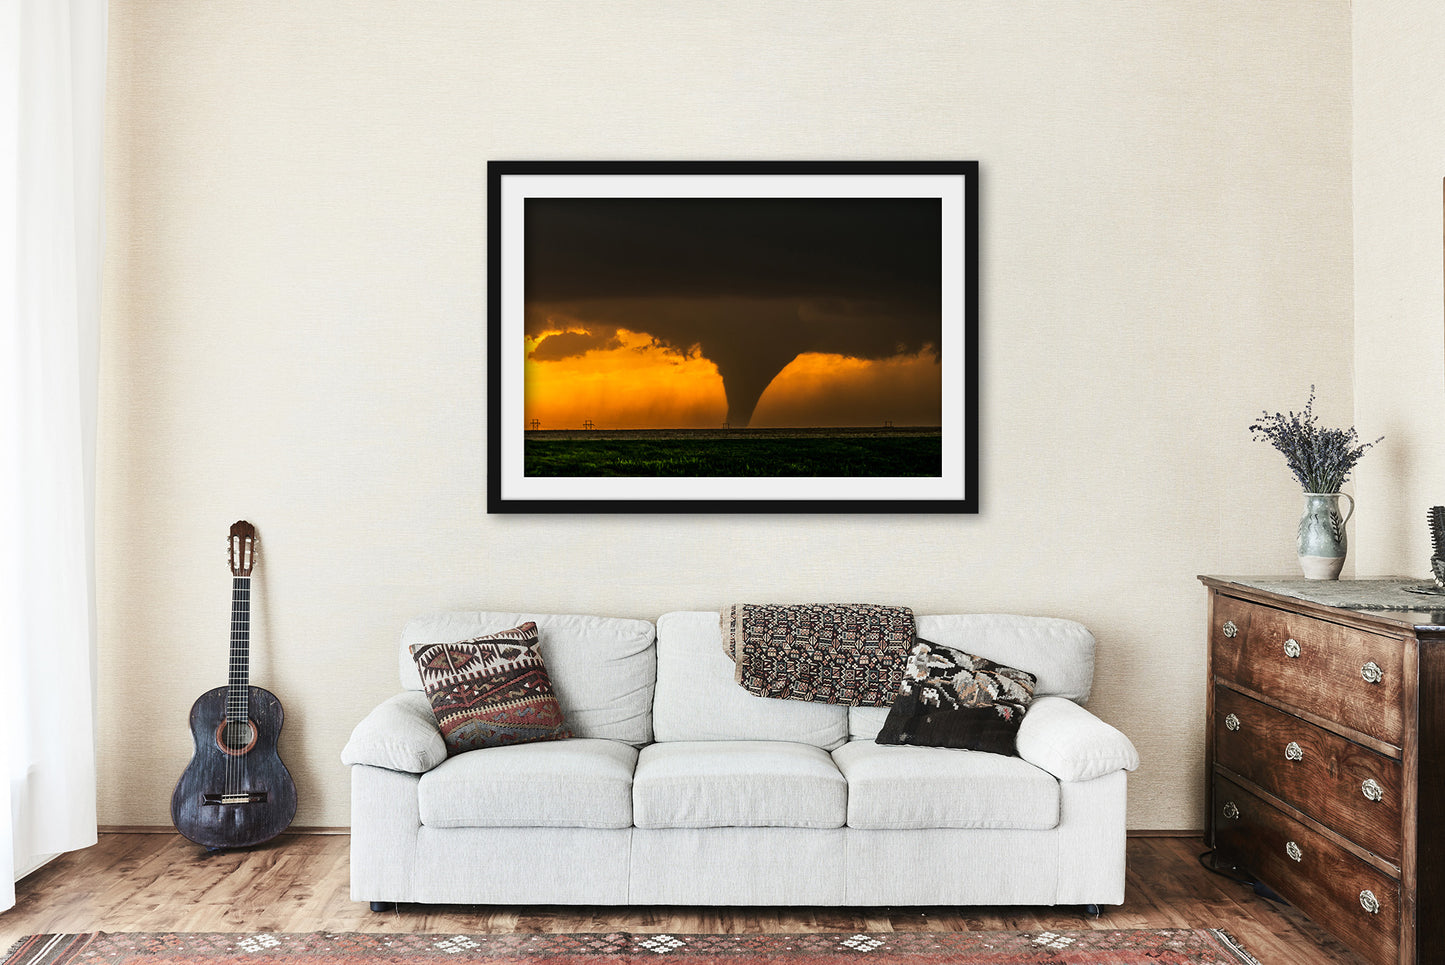 Framed and Matted Print - Picture of Large Tornado as Silhouette at Sunset on Spring Evening in Kansas Storm Wall Art Nature Decor